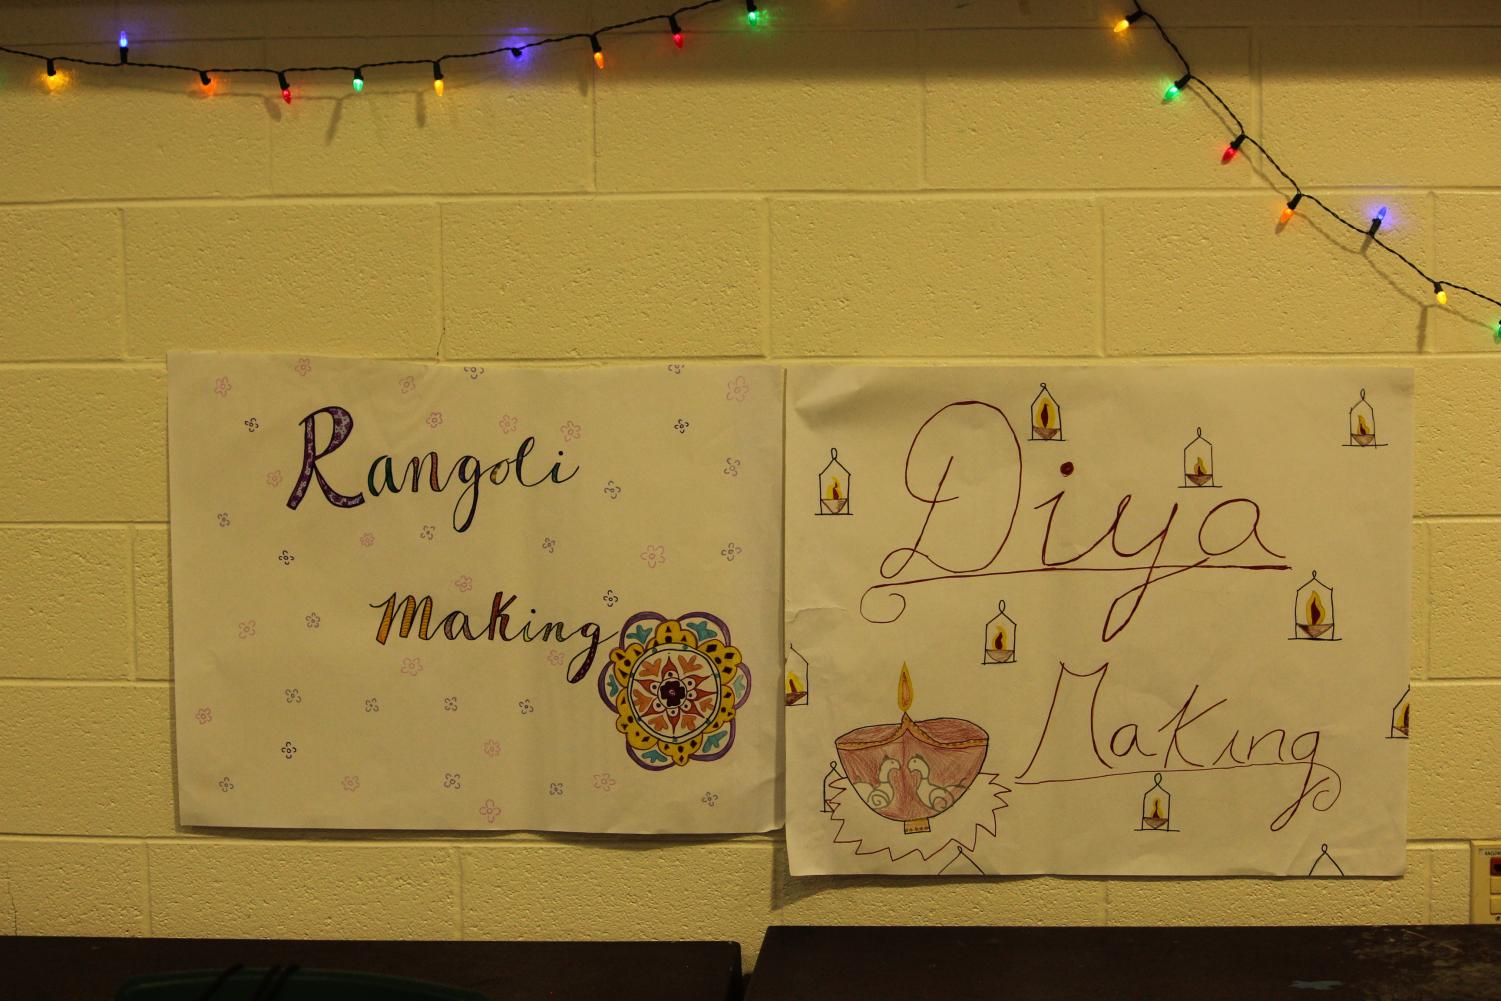 South+Asian+Student+Union+celebrates+Diwali+with+the+school+community